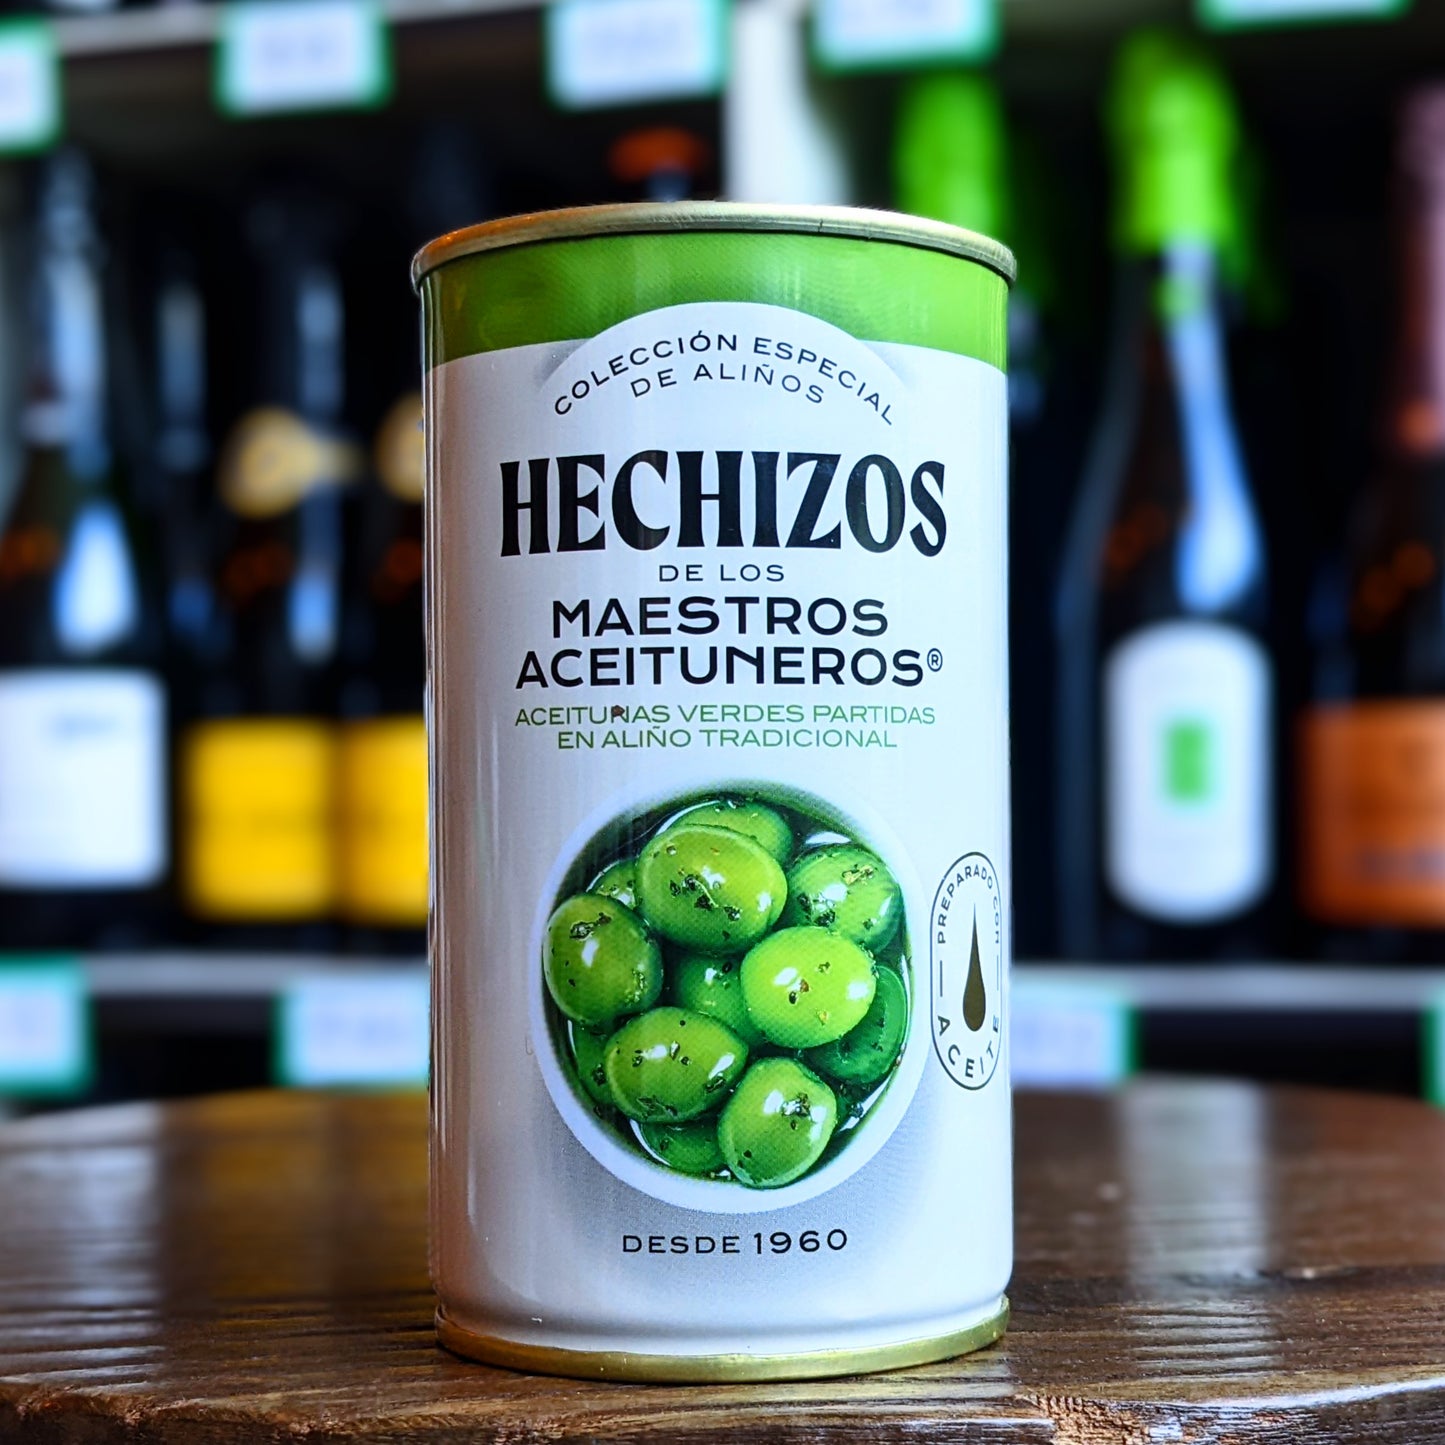 Hechizos, Stone In Olives, Spain (350g)